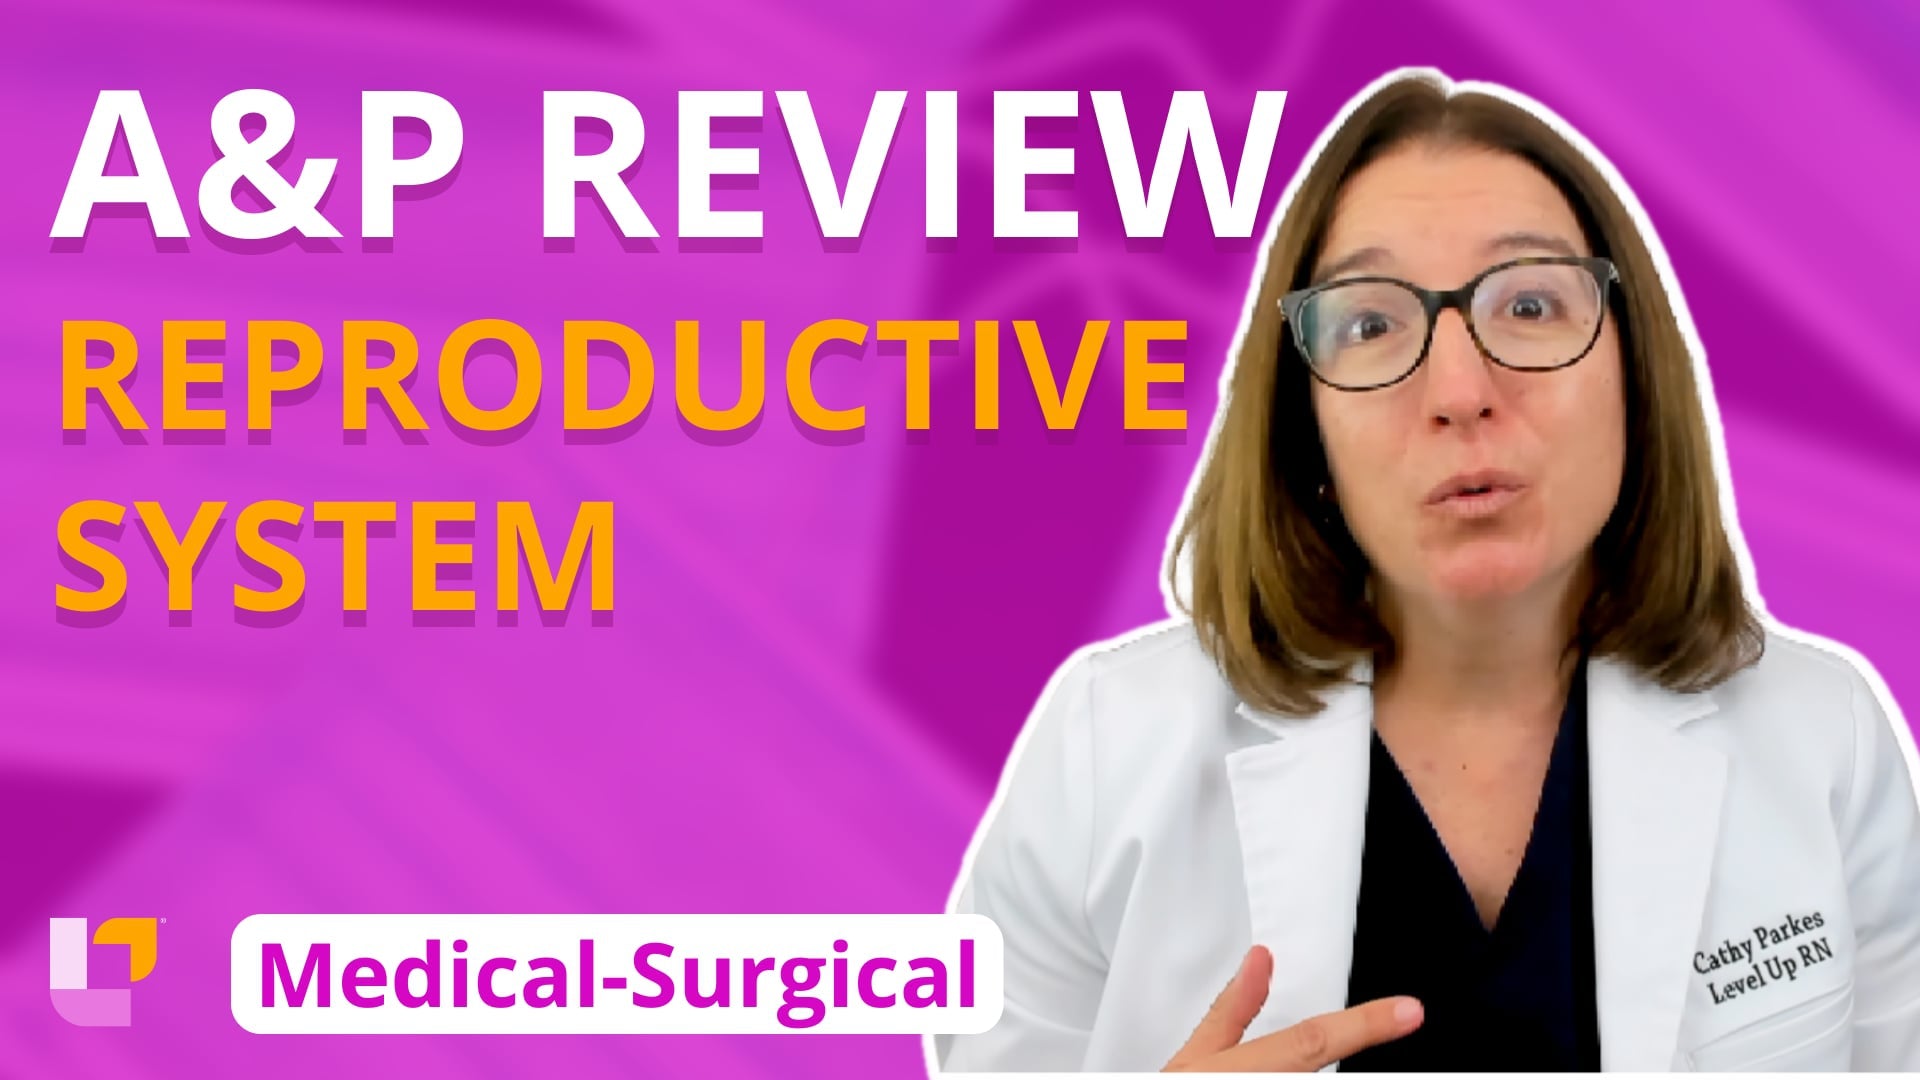 Med-Surg - Reproductive System, part 1: Anatomy & Physiology Review - LevelUpRN